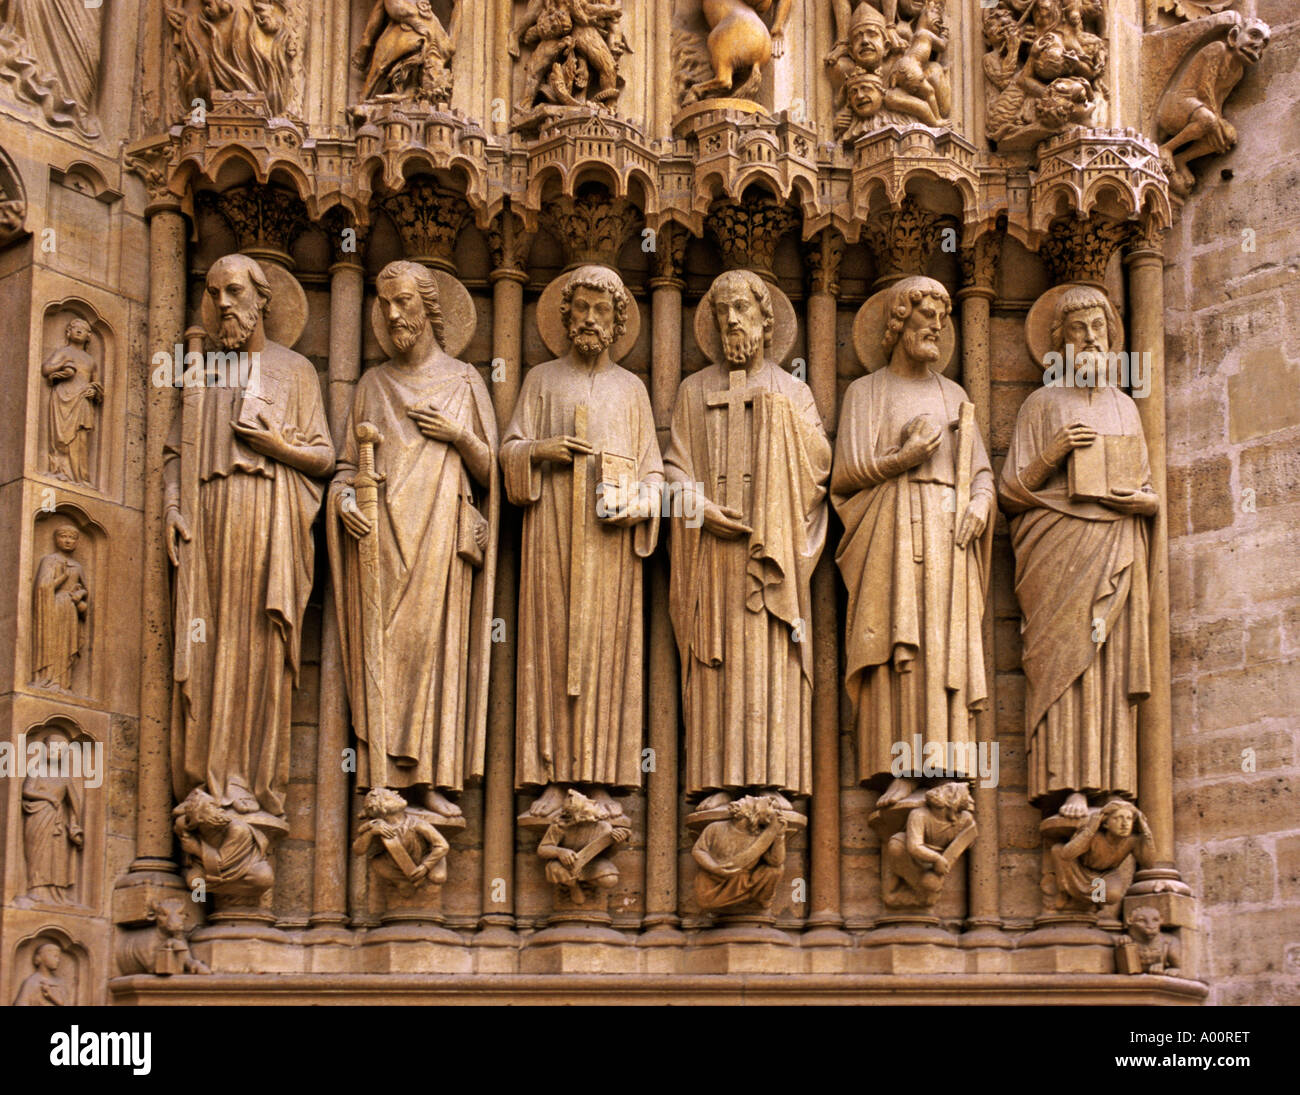 STATUES NOTRE DAME CATHEDRAL PARIS FRANCE Stock Photo - Alamy